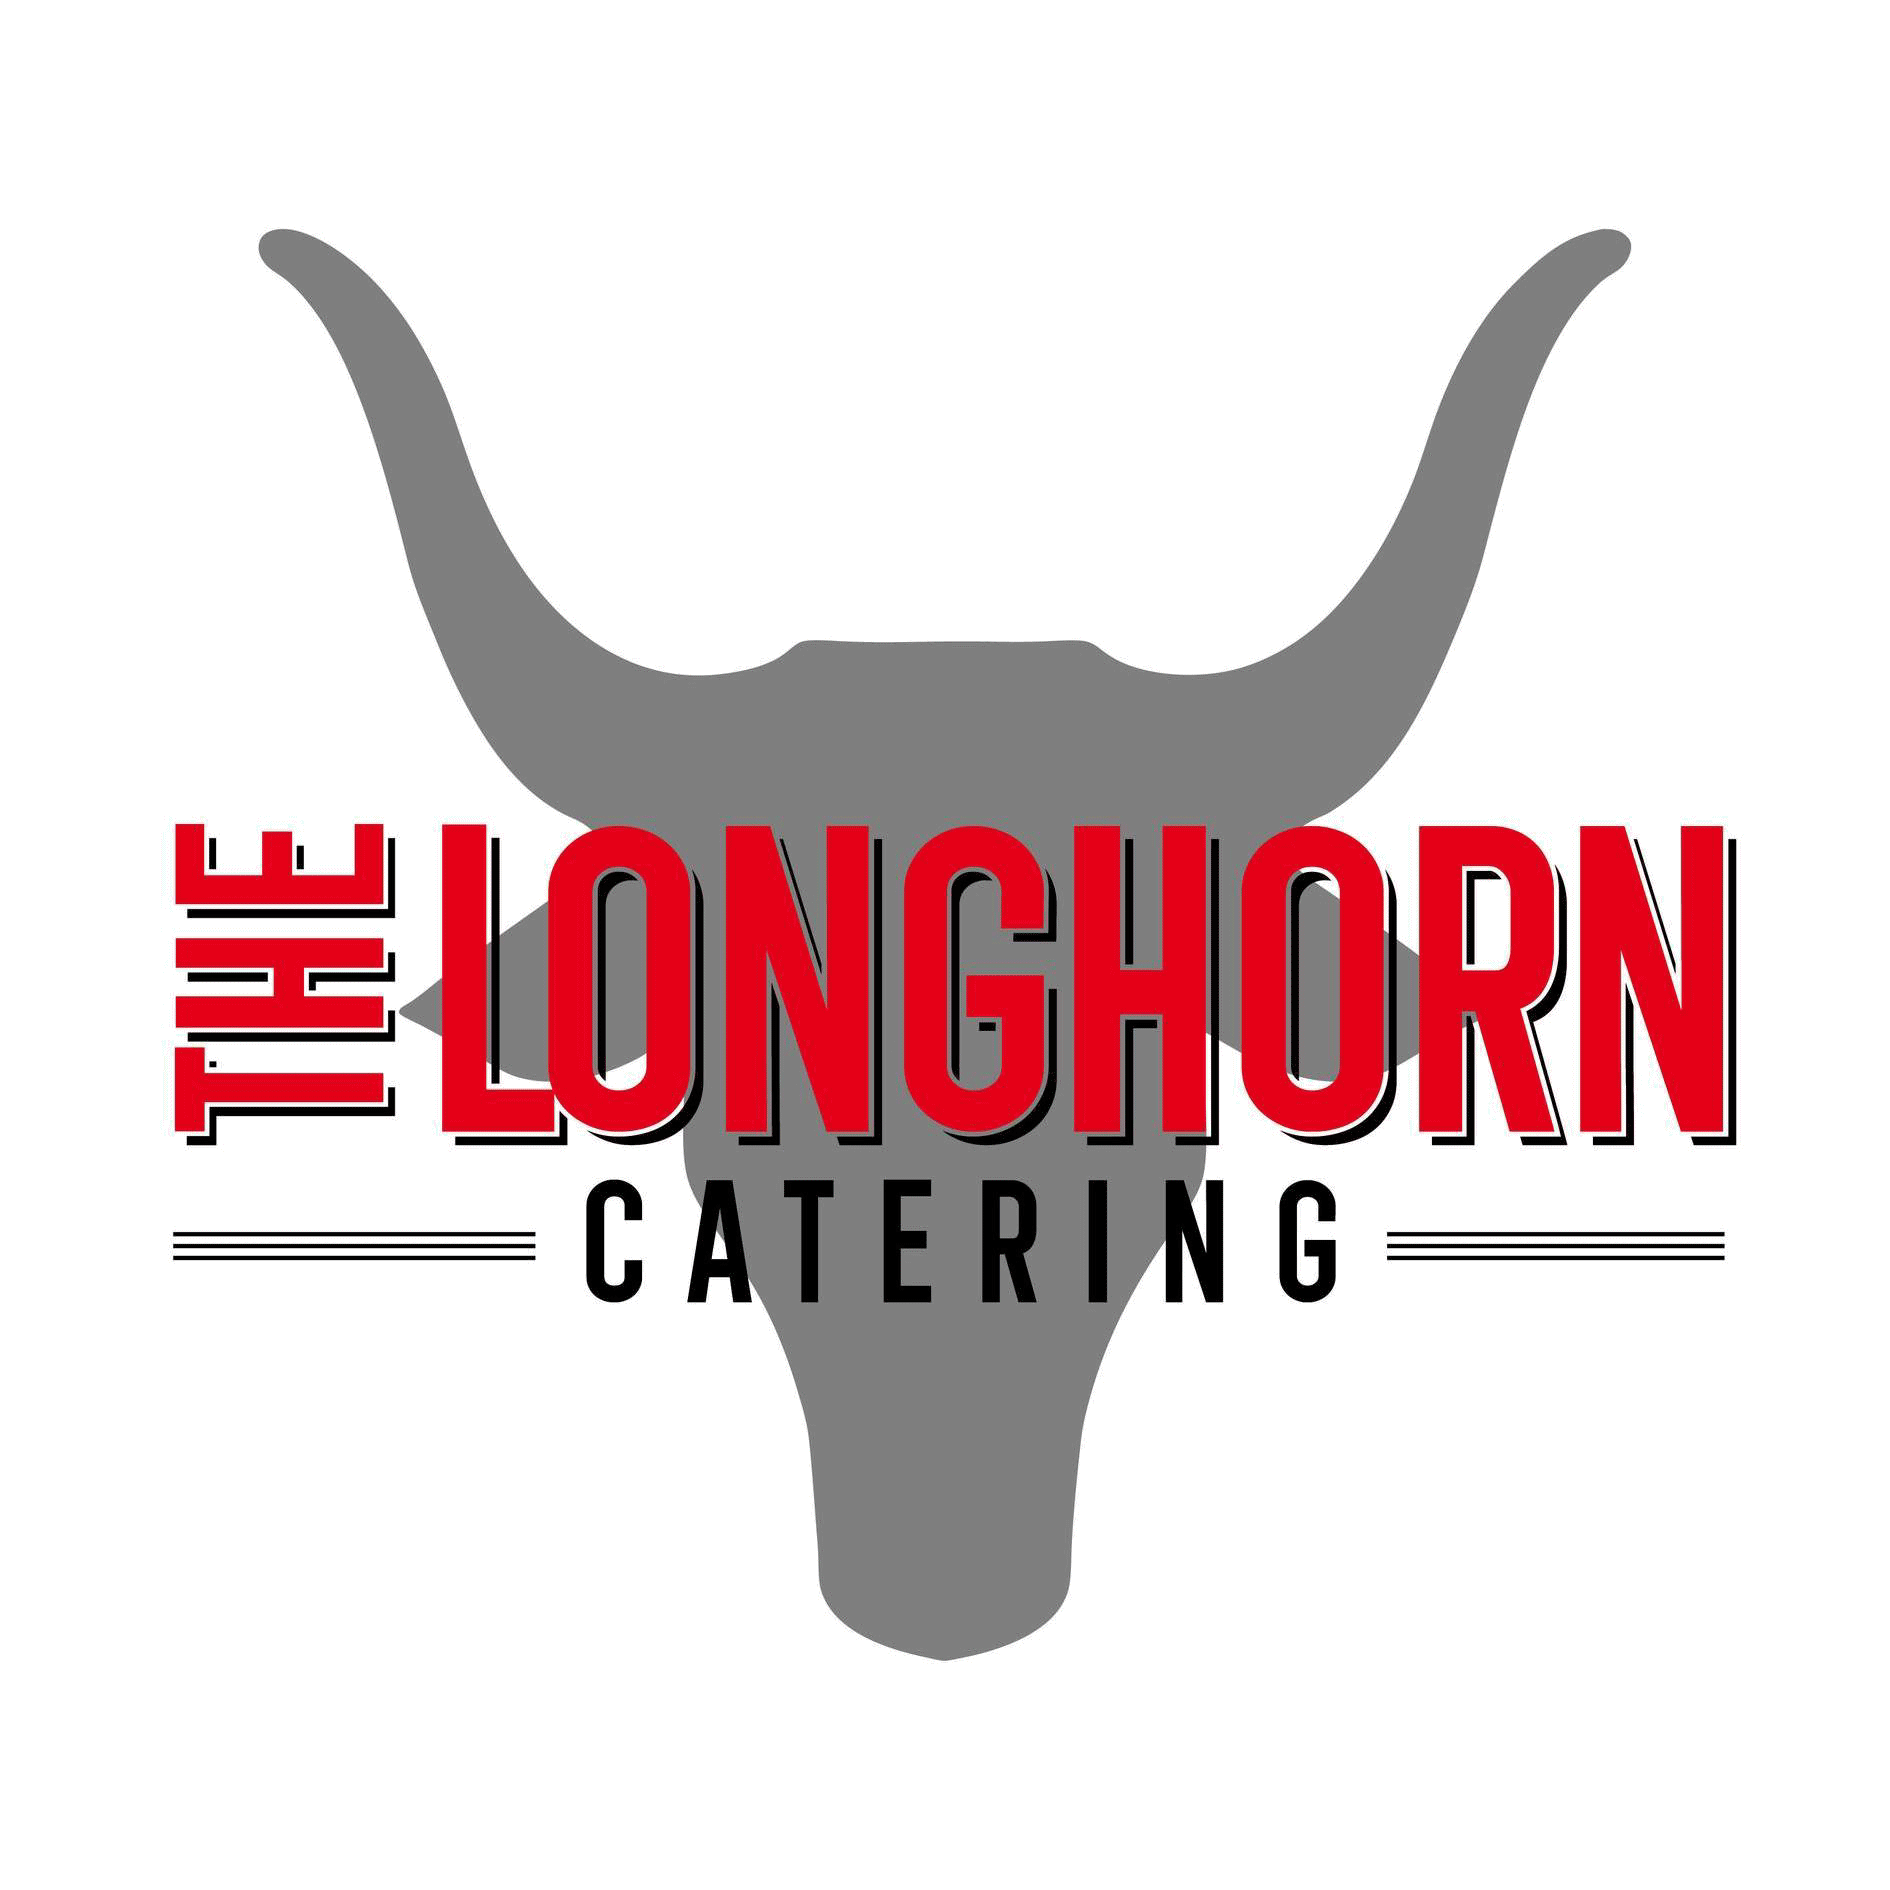 The longhorn catering